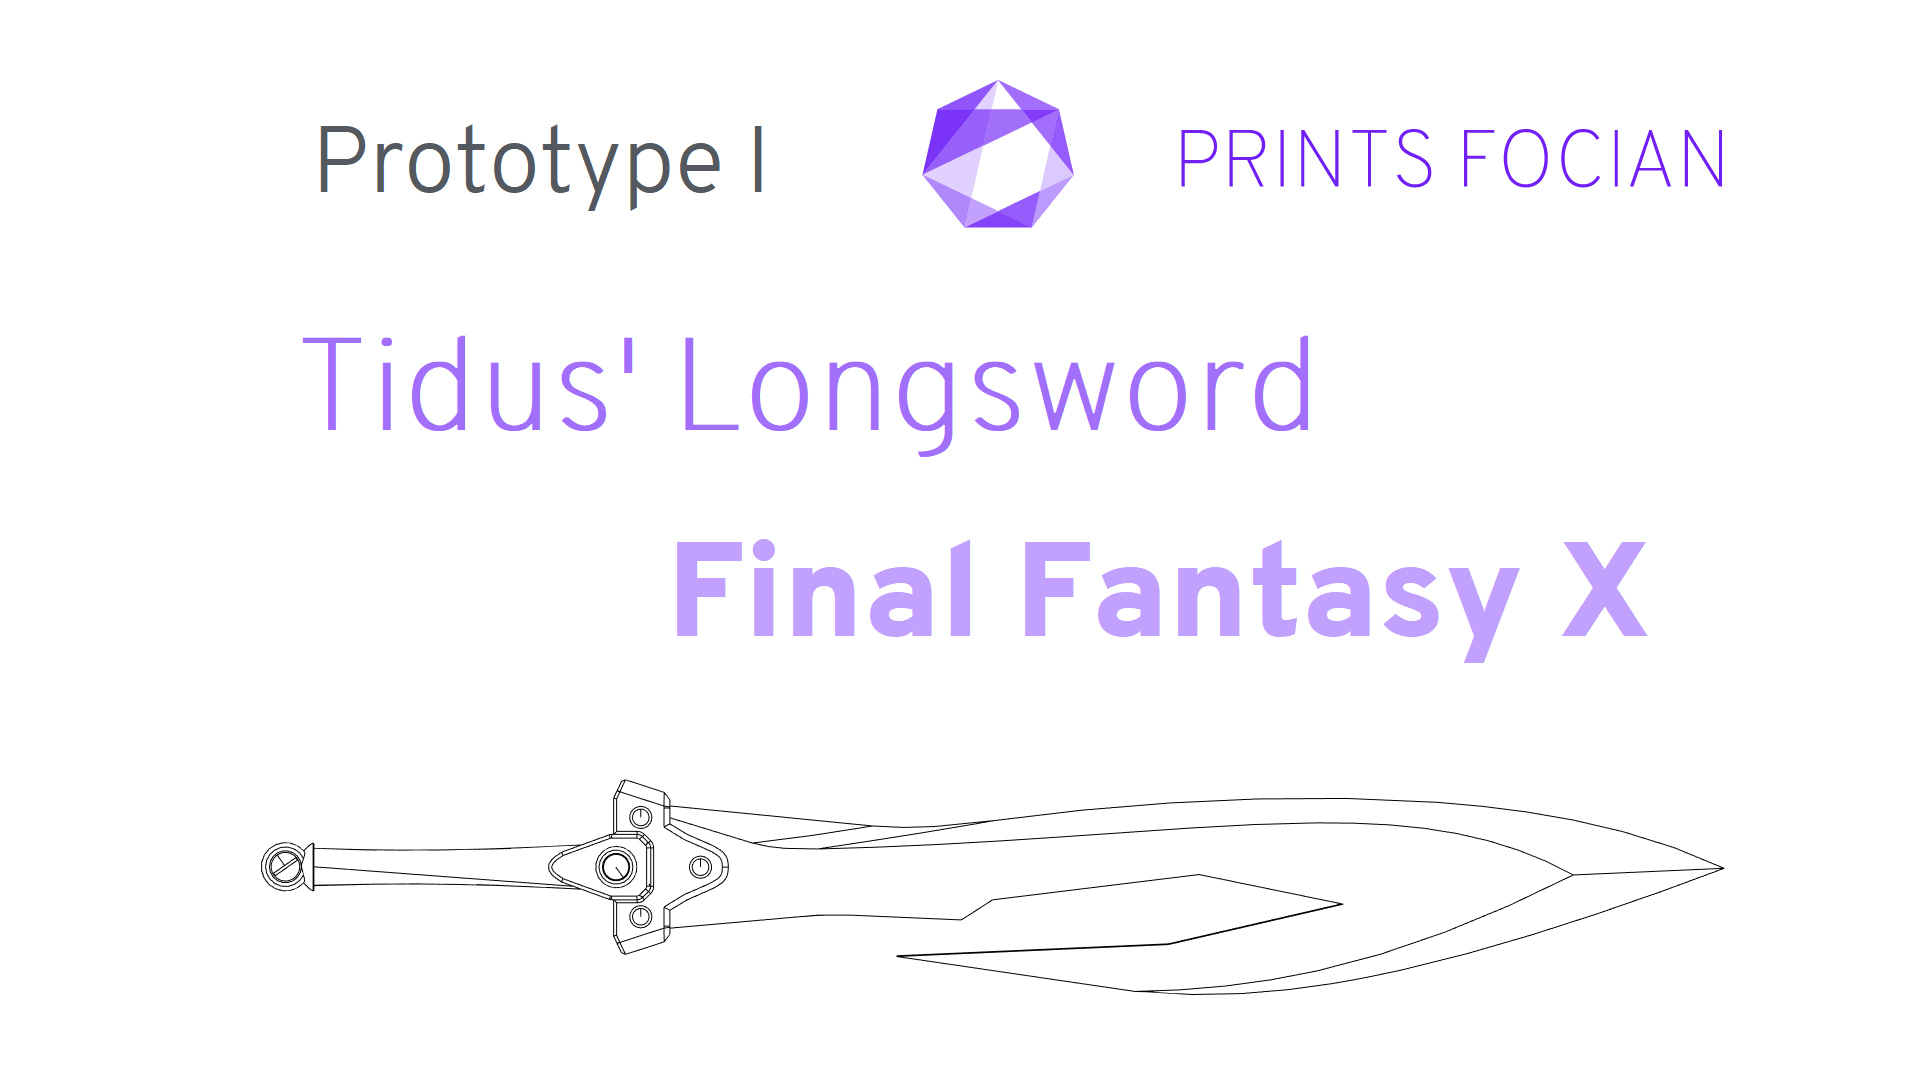 Wireframe image of the Tidus' Longsword on a white background. Prints Focian Icon top and central. Text: Purple Prints Focian, Tidus' Longsword, FInal Fantasy X and dark grey Prototype I